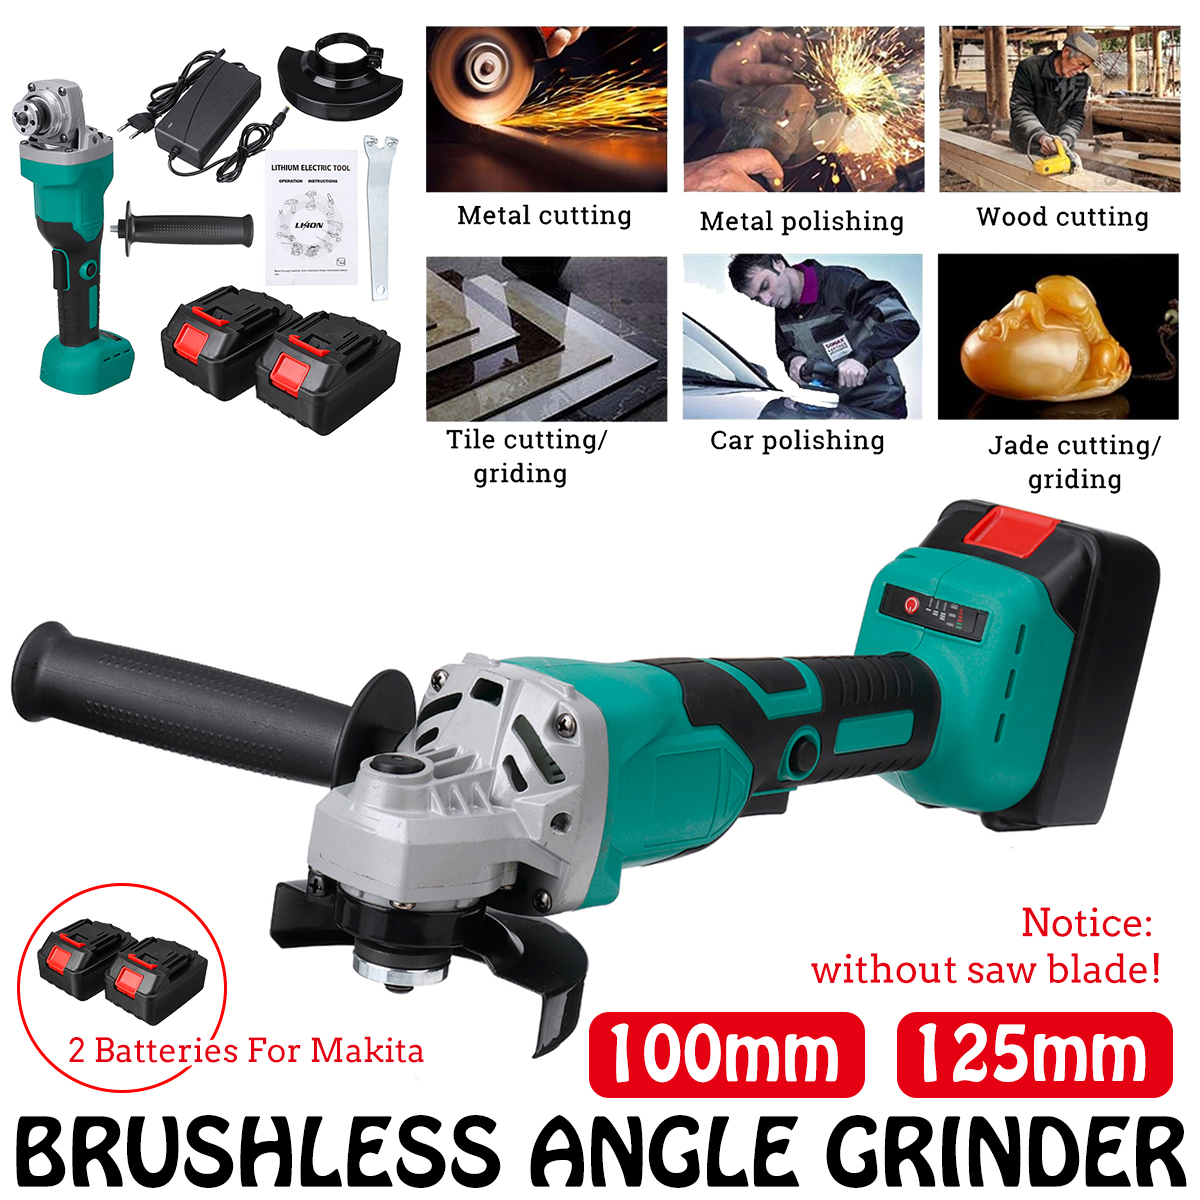 100mm125mm-Brushless-Electric-Angle-Grinder-Polishing-Grinding-Cutting-Tool-W-1pc2pcs-Battery-For-Ma-1926096-2